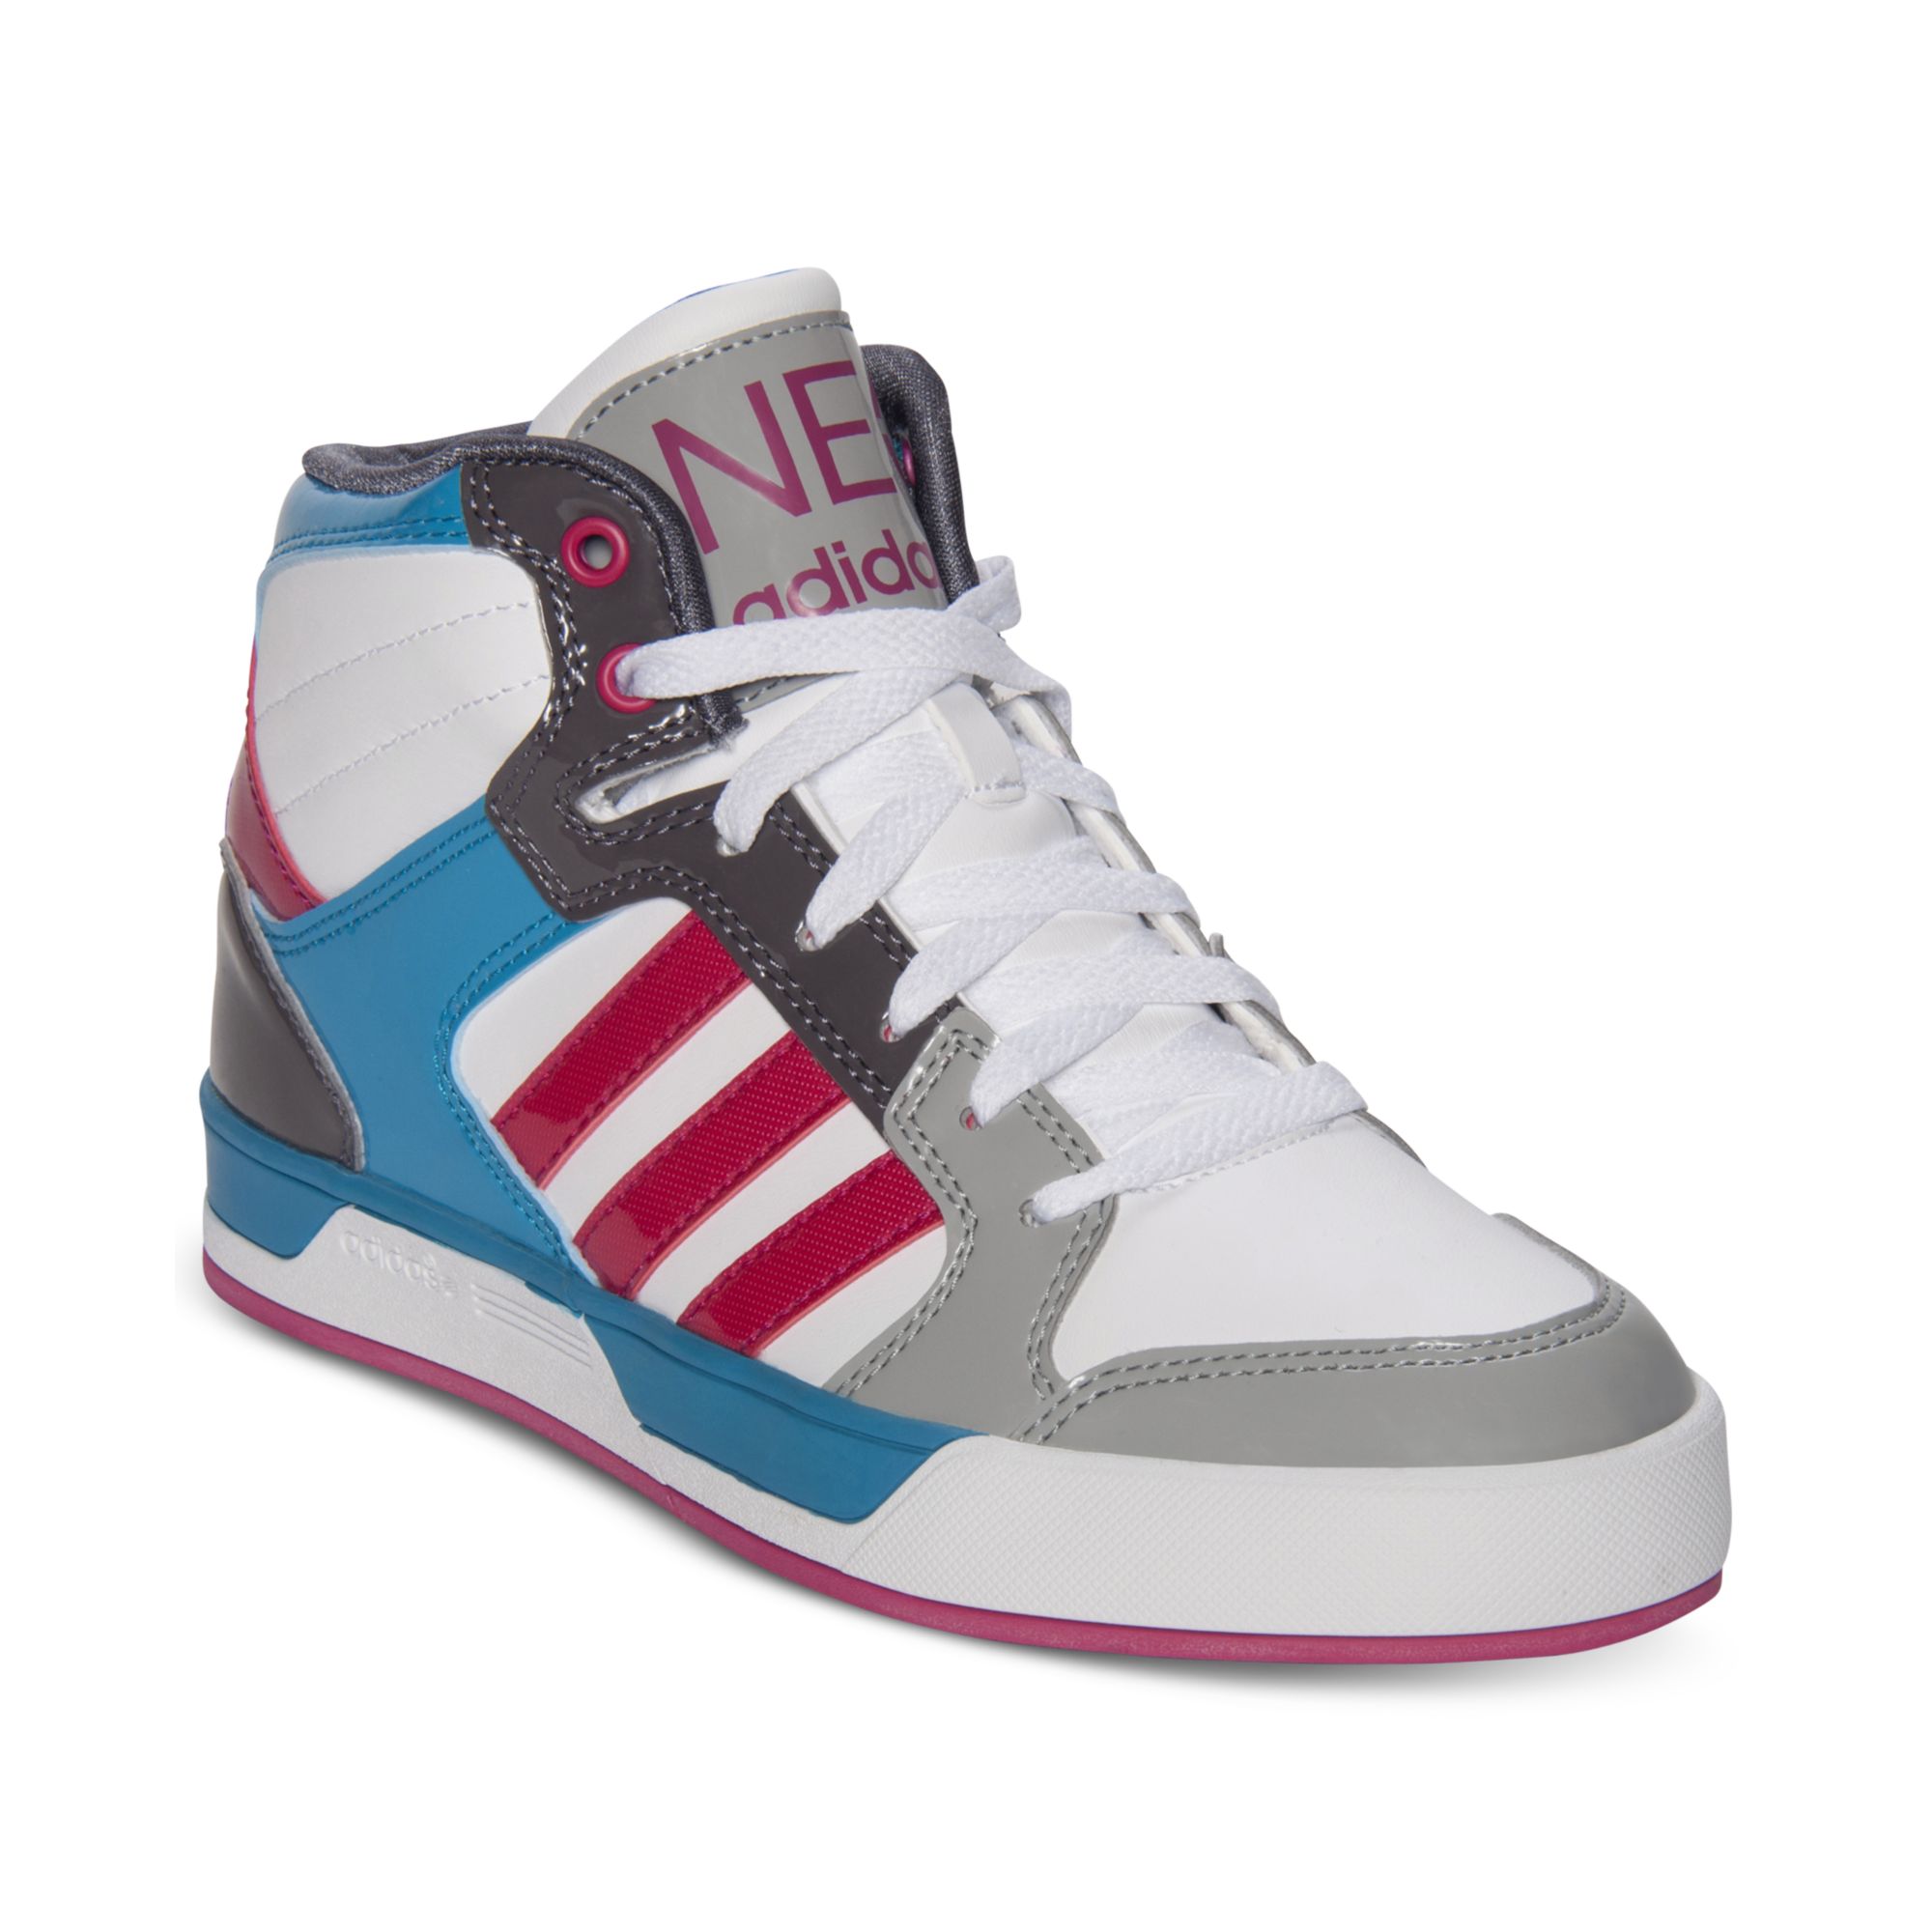 Adidas Bbneo Raleigh Mid Casual Sneakers in Multicolor (RUNNING WHITE ...